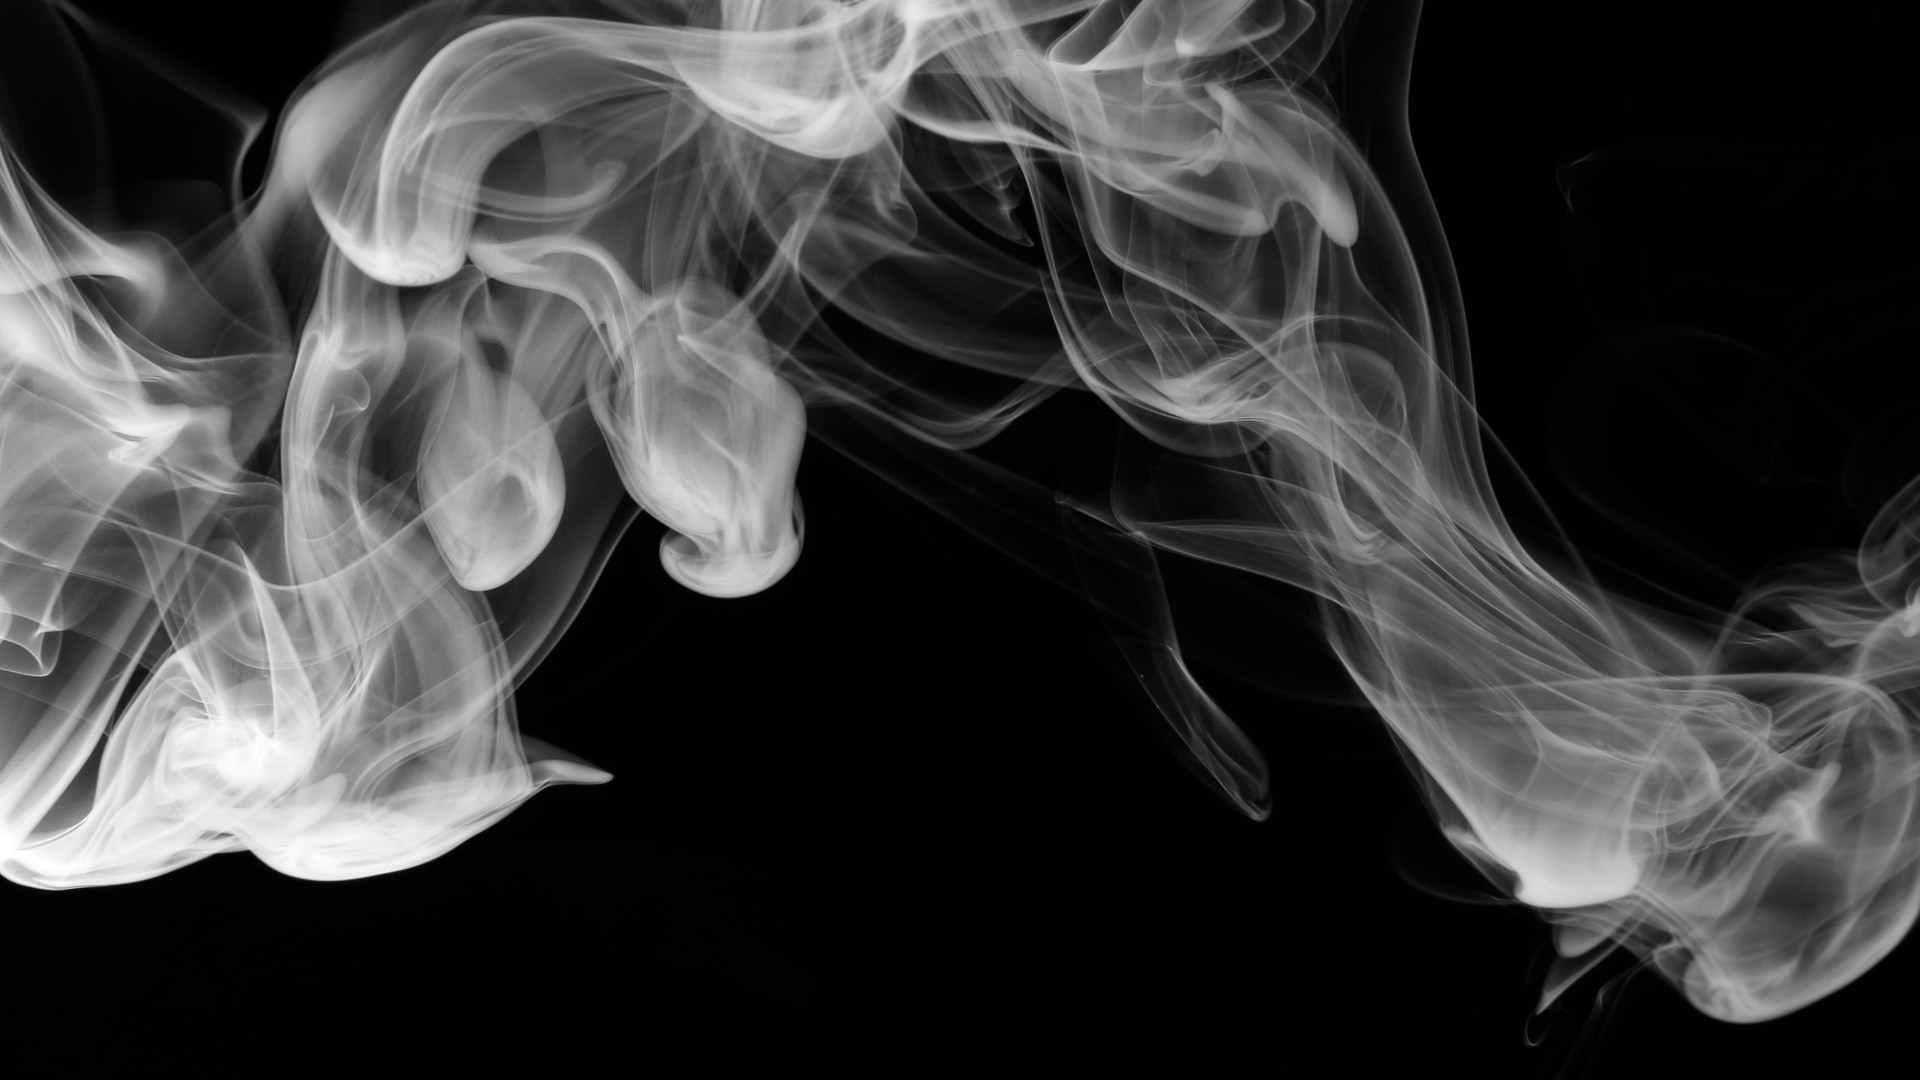 Closeup of some smoke, set against a solid black background